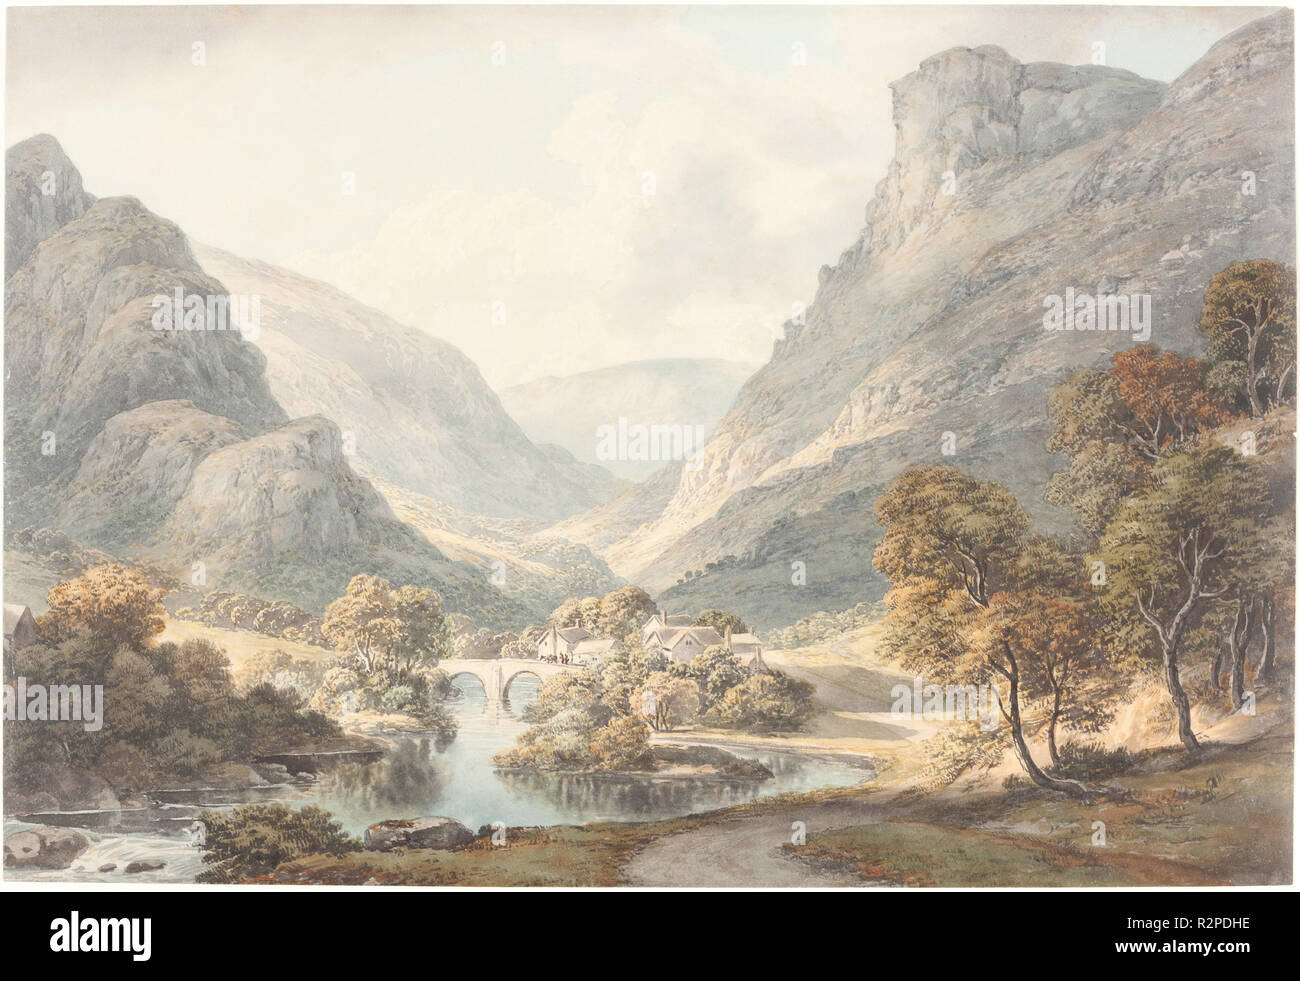 A View of Dovedale. Dated: c. 1825. Dimensions: overall: 26.3 x 38.7 cm (10 3/8 x 15 1/4 in.). Medium: watercolor over graphite on wove paper. Museum: National Gallery of Art, Washington DC. Author: John Glover. Stock Photo